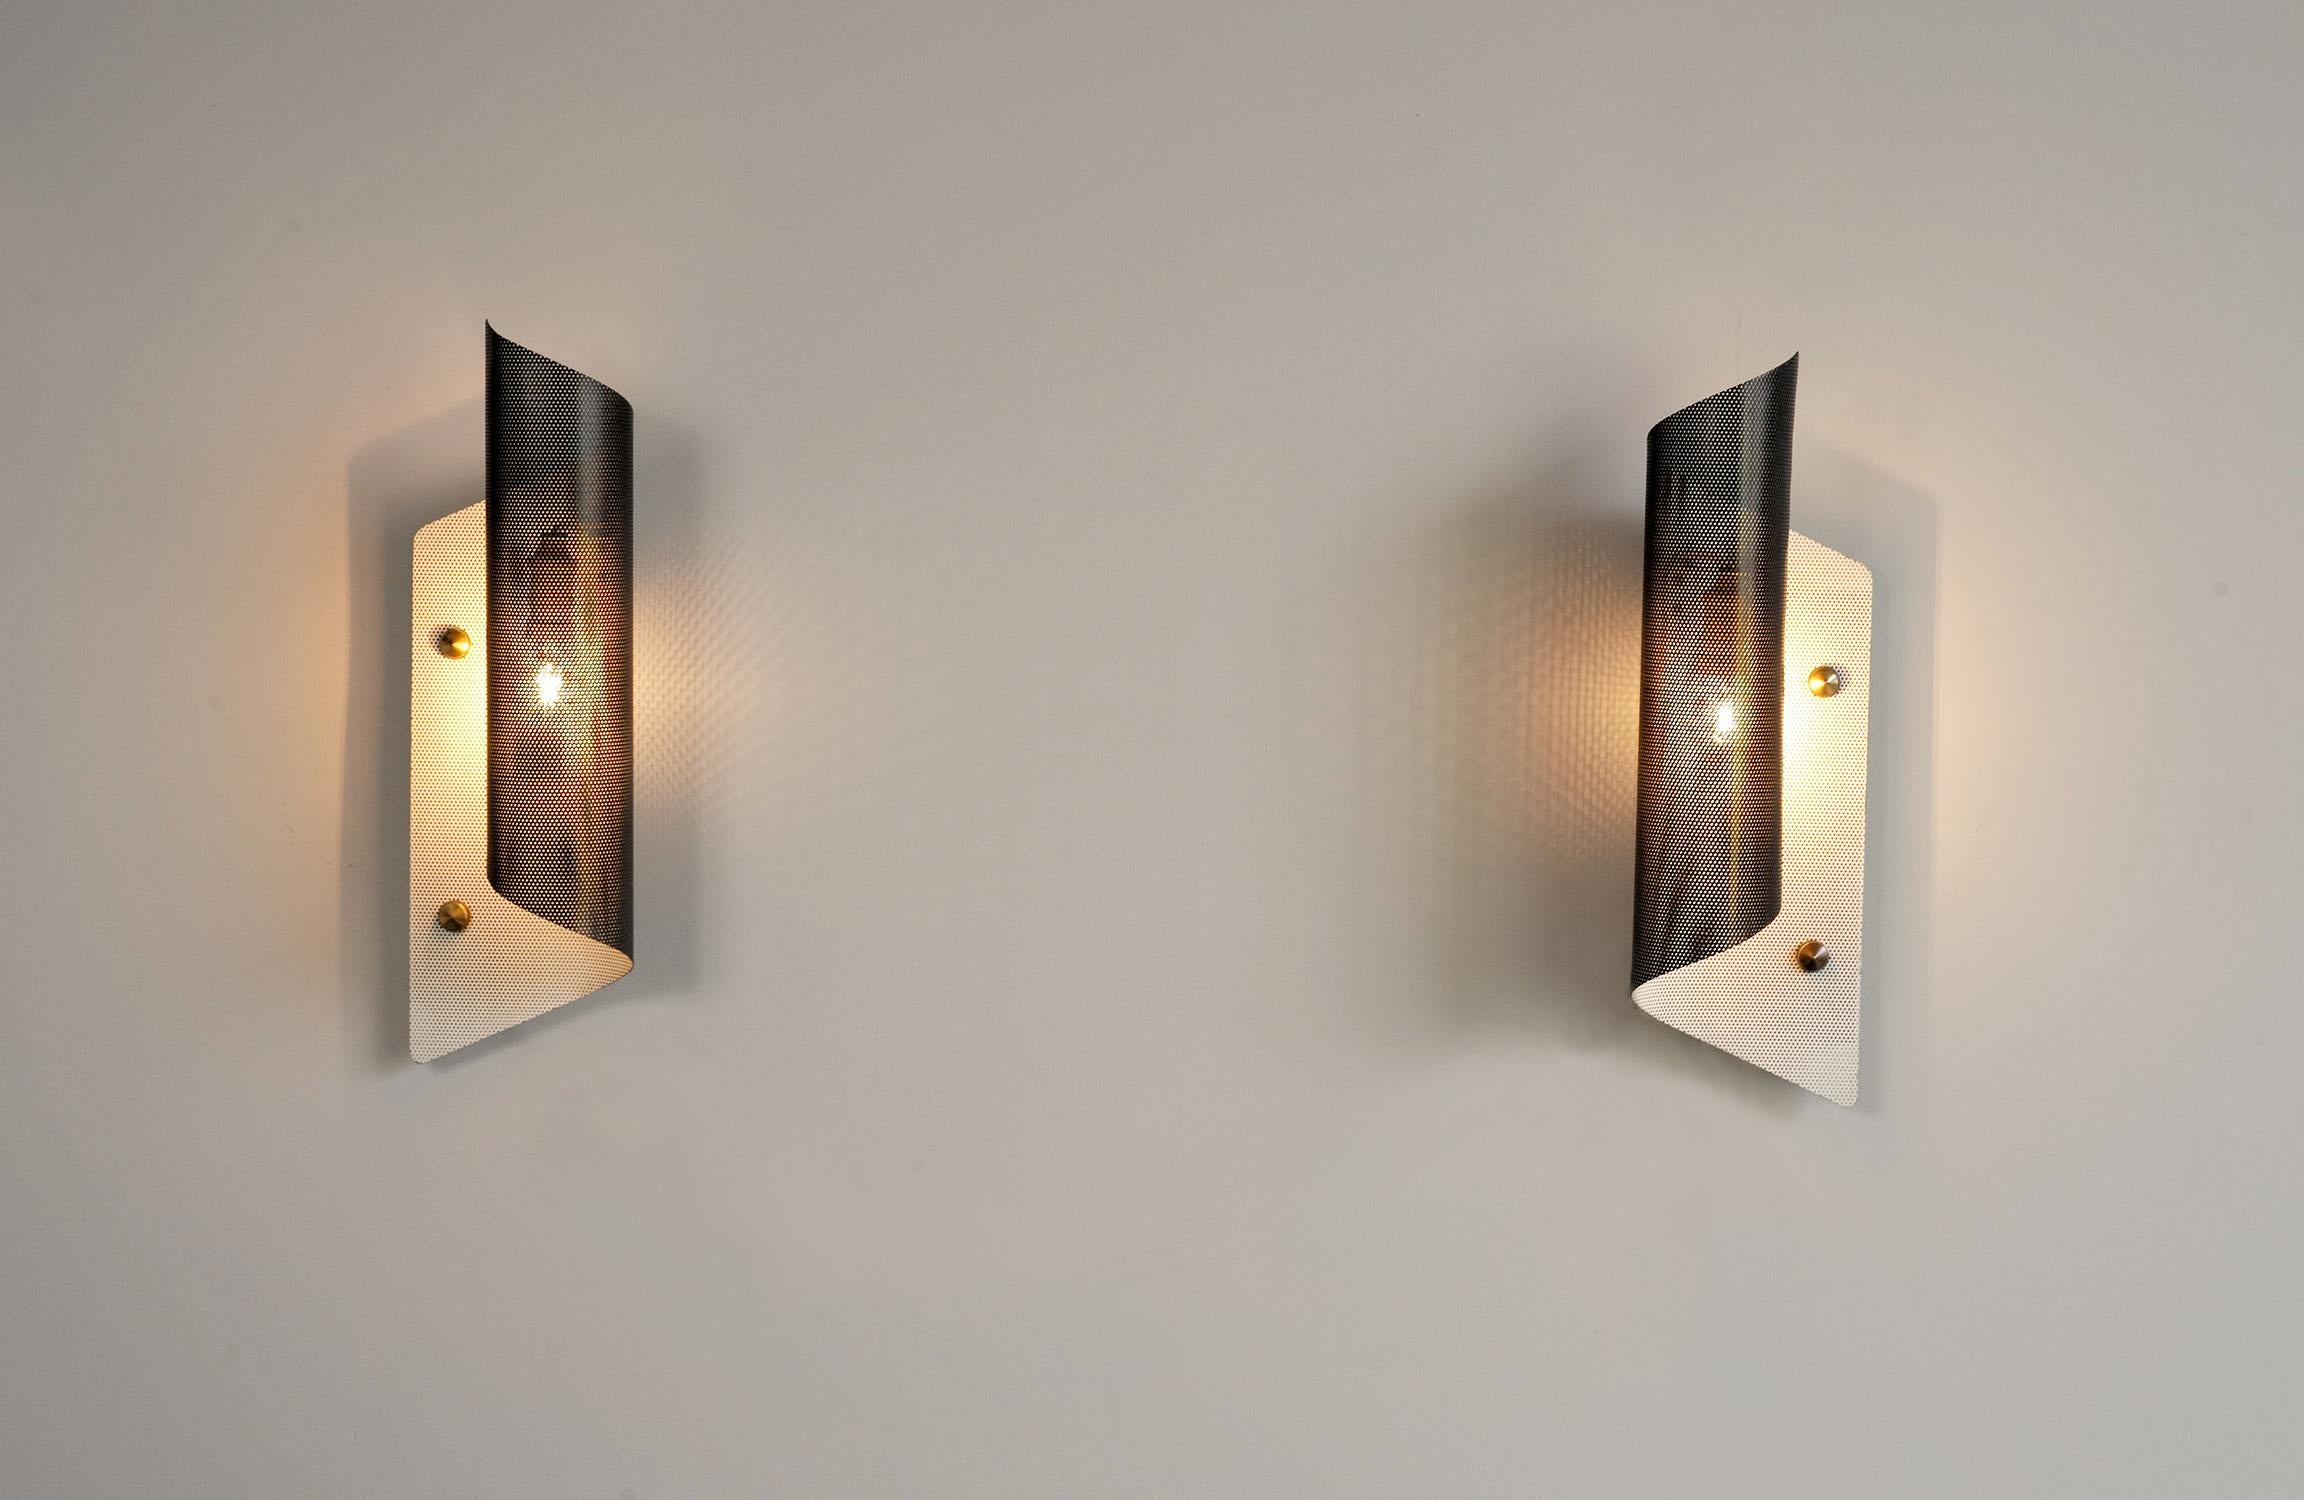 Rare pair of perforated metal sconces, black and white lacquered by Maison Lunel, France, 1950.
Adjustable at will, these sober and elegant luminaires produce a very pleasant light through the sieve perforations.
Very beautiful original state.